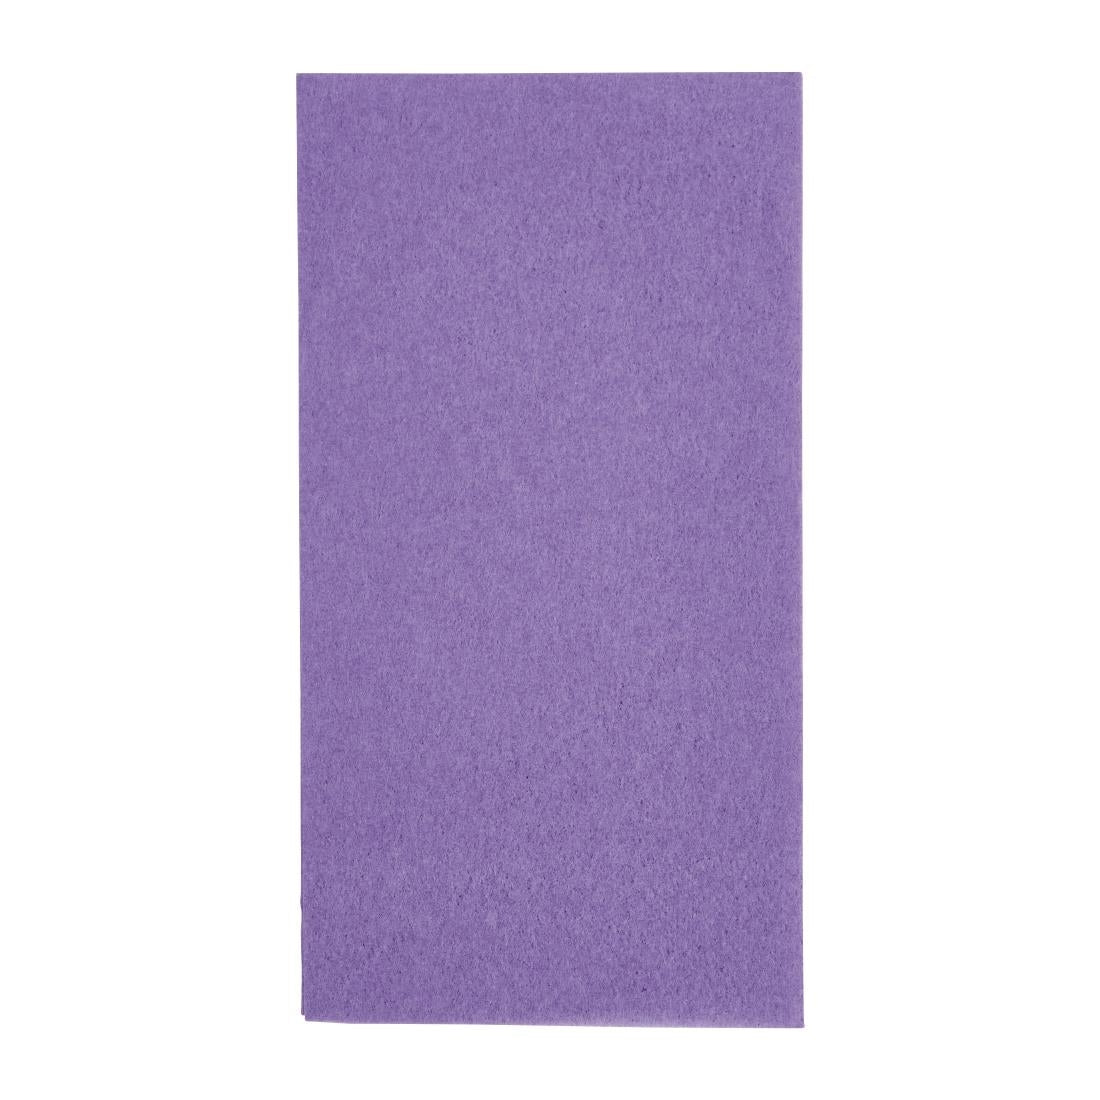 FE232 Fiesta Lunch Napkins Plum 330mm (Pack of 2000) JD Catering Equipment Solutions Ltd